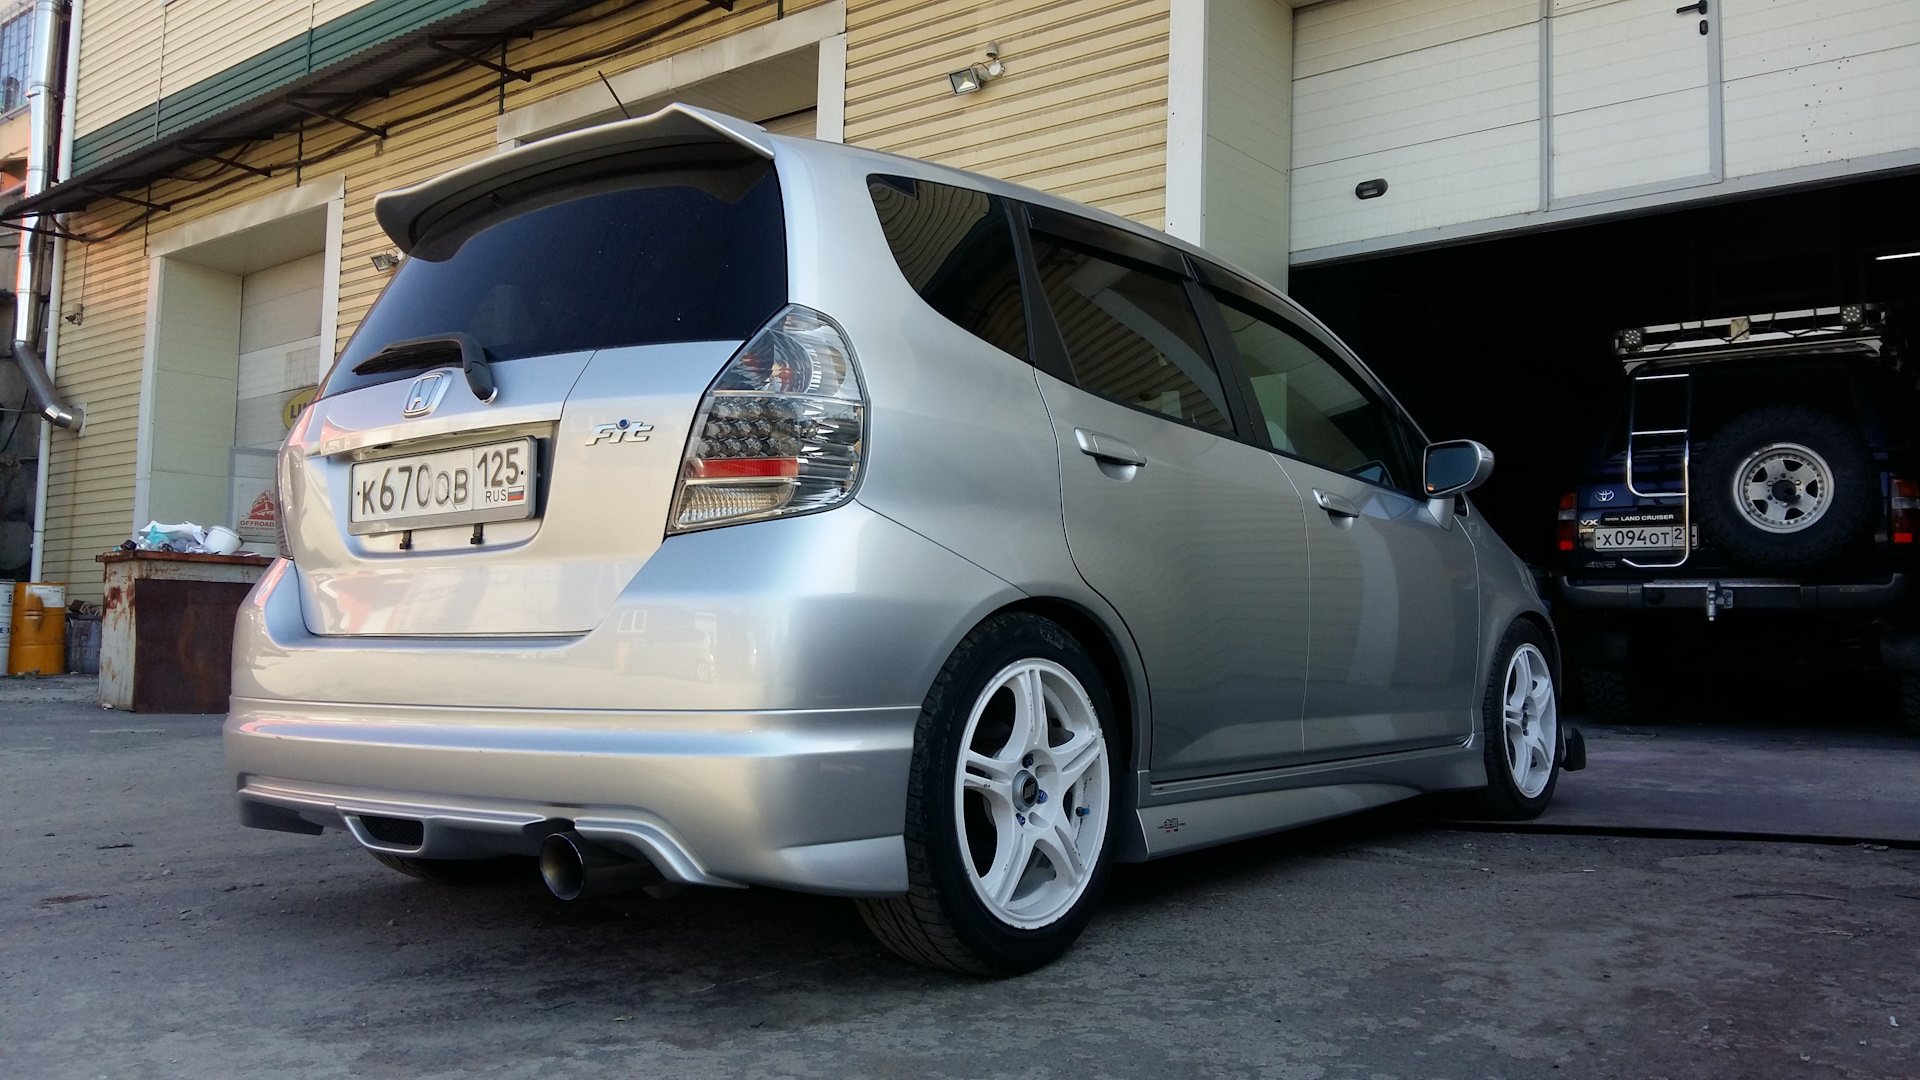 Fitter first. Honda Fit gd1. Honda Fit 2005 Tuning. Honda Fit GD 2005 Tuning. Honda Fit GD 2001-2007.